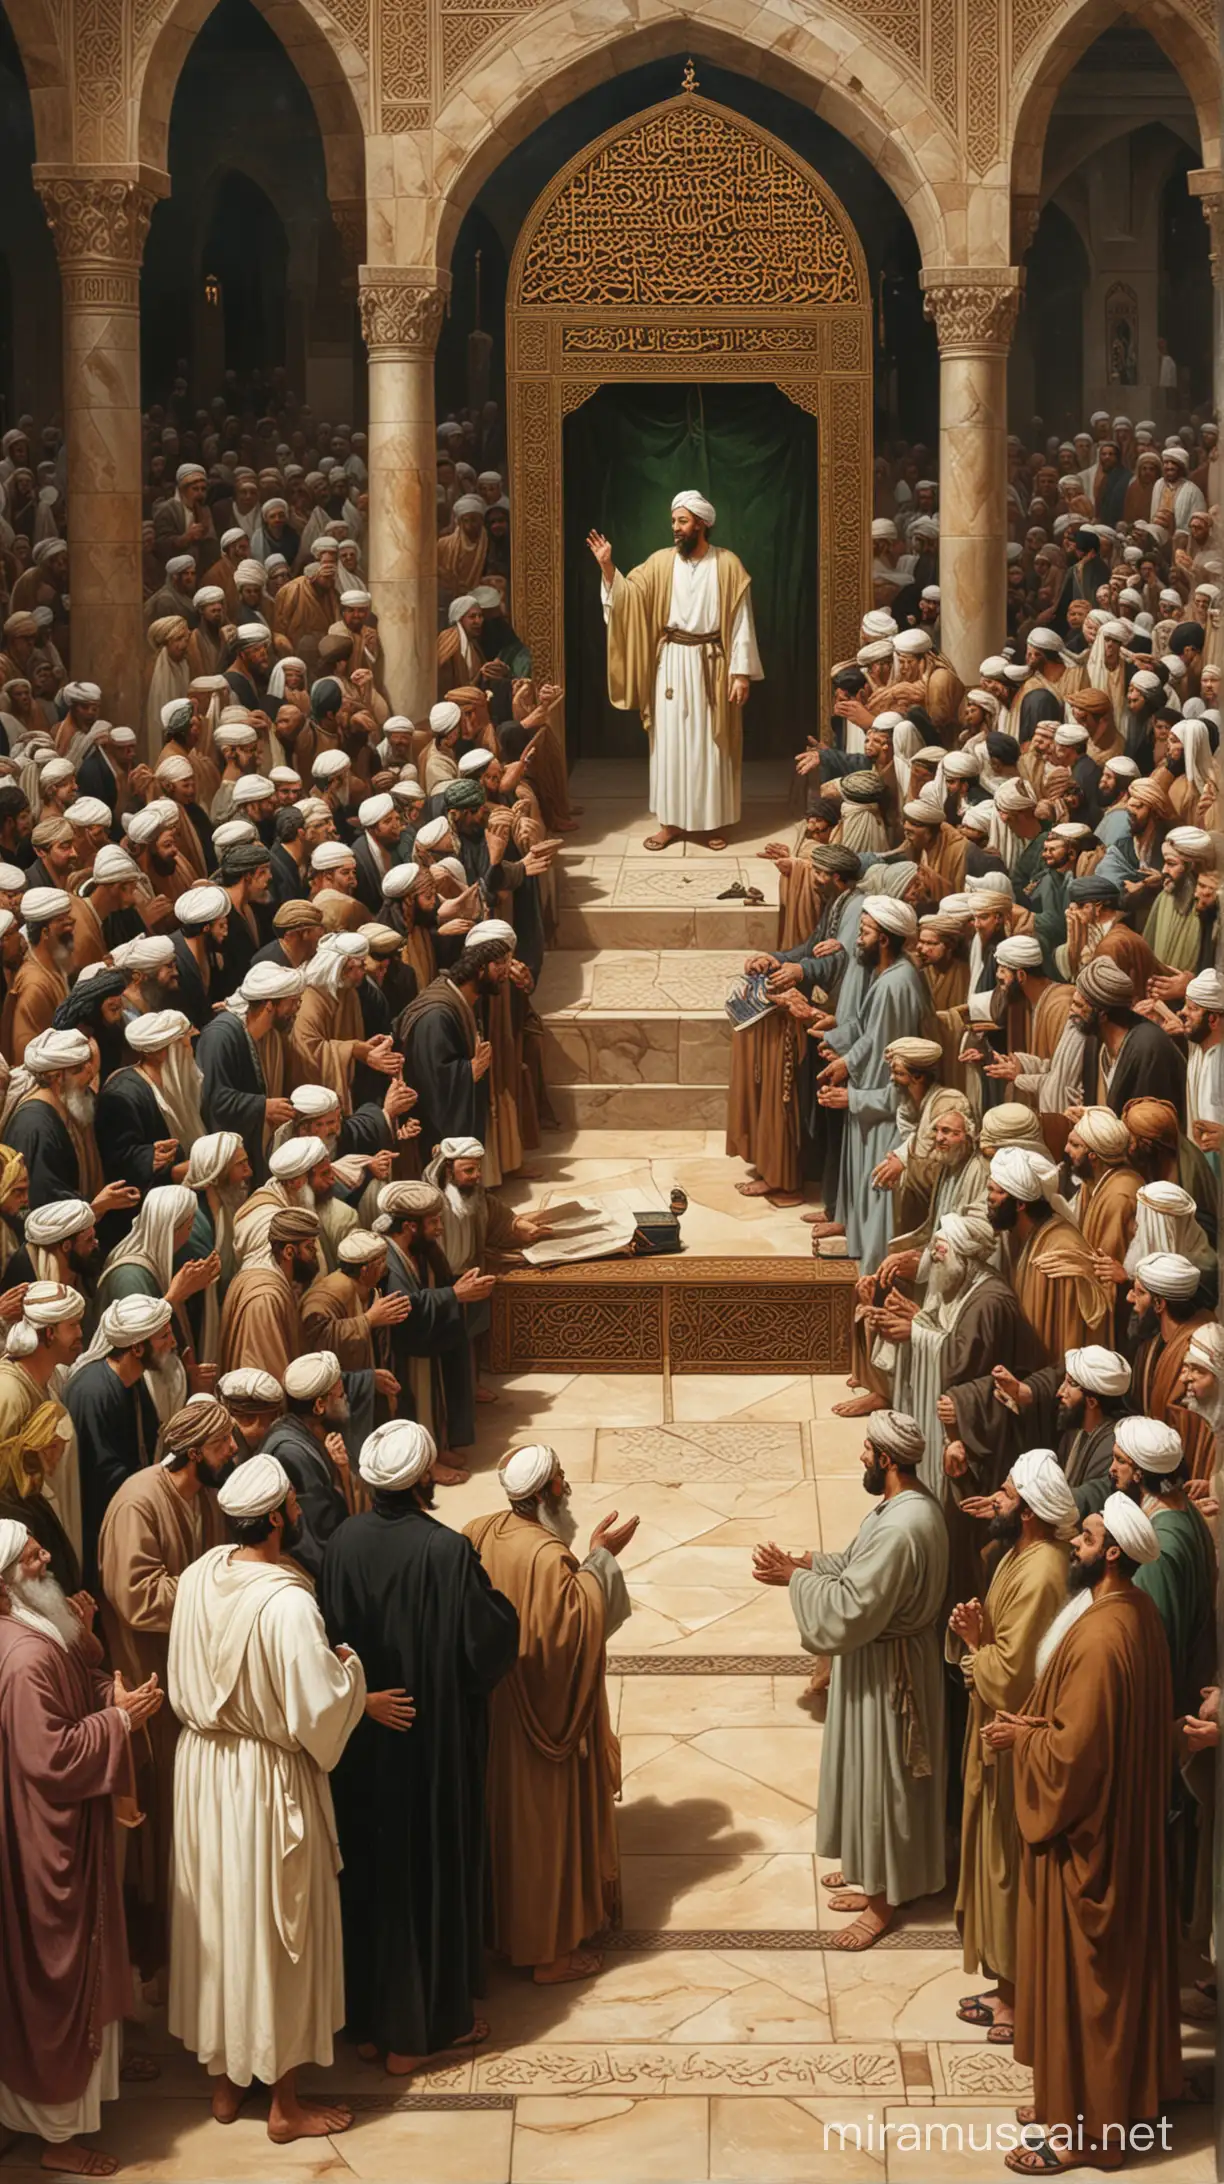 "Prophet Muhammad's Impartial Judgment"
Description: Visual depiction of Prophet Muhammad (PBUH) presiding over the arbitration of the Jewish man's case, showcasing his impartiality and dedication to upholding justice.